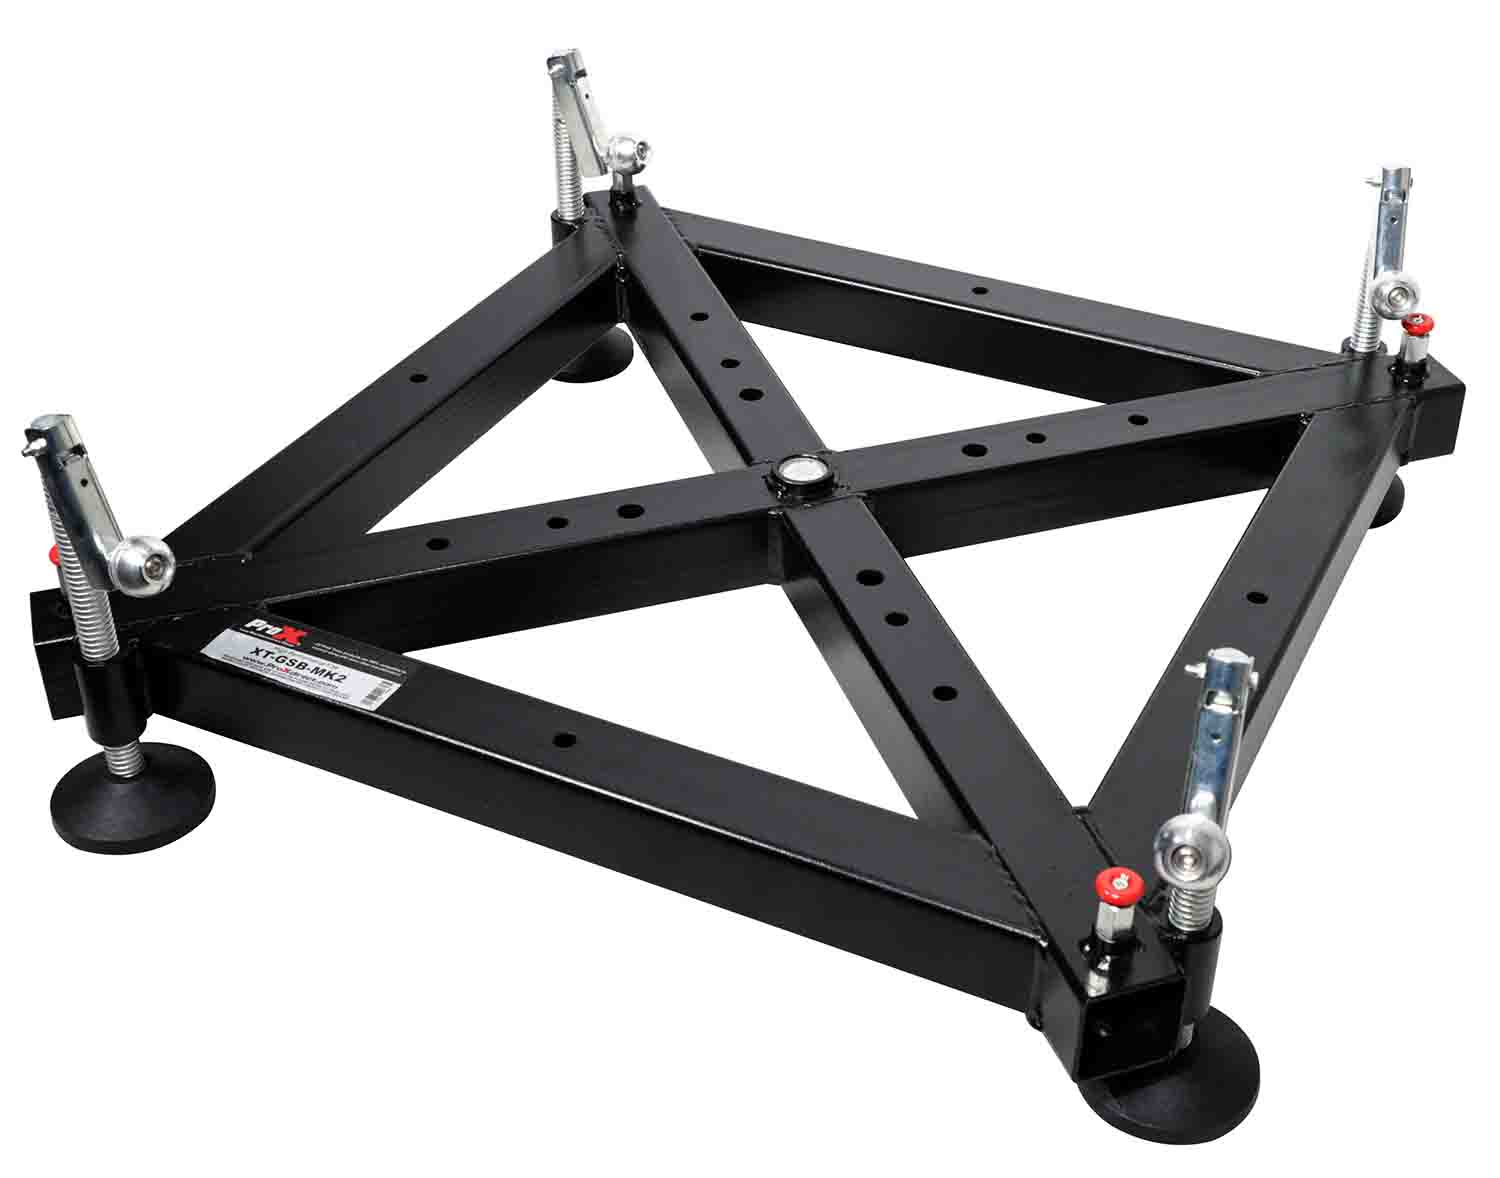 PROX XT-GSB MK3 Universal Vertical Tower Truss Ground Support Base on Wheels with Leveling Jacks for F34, F44 and 12" Bolt truss - Hollywood DJ